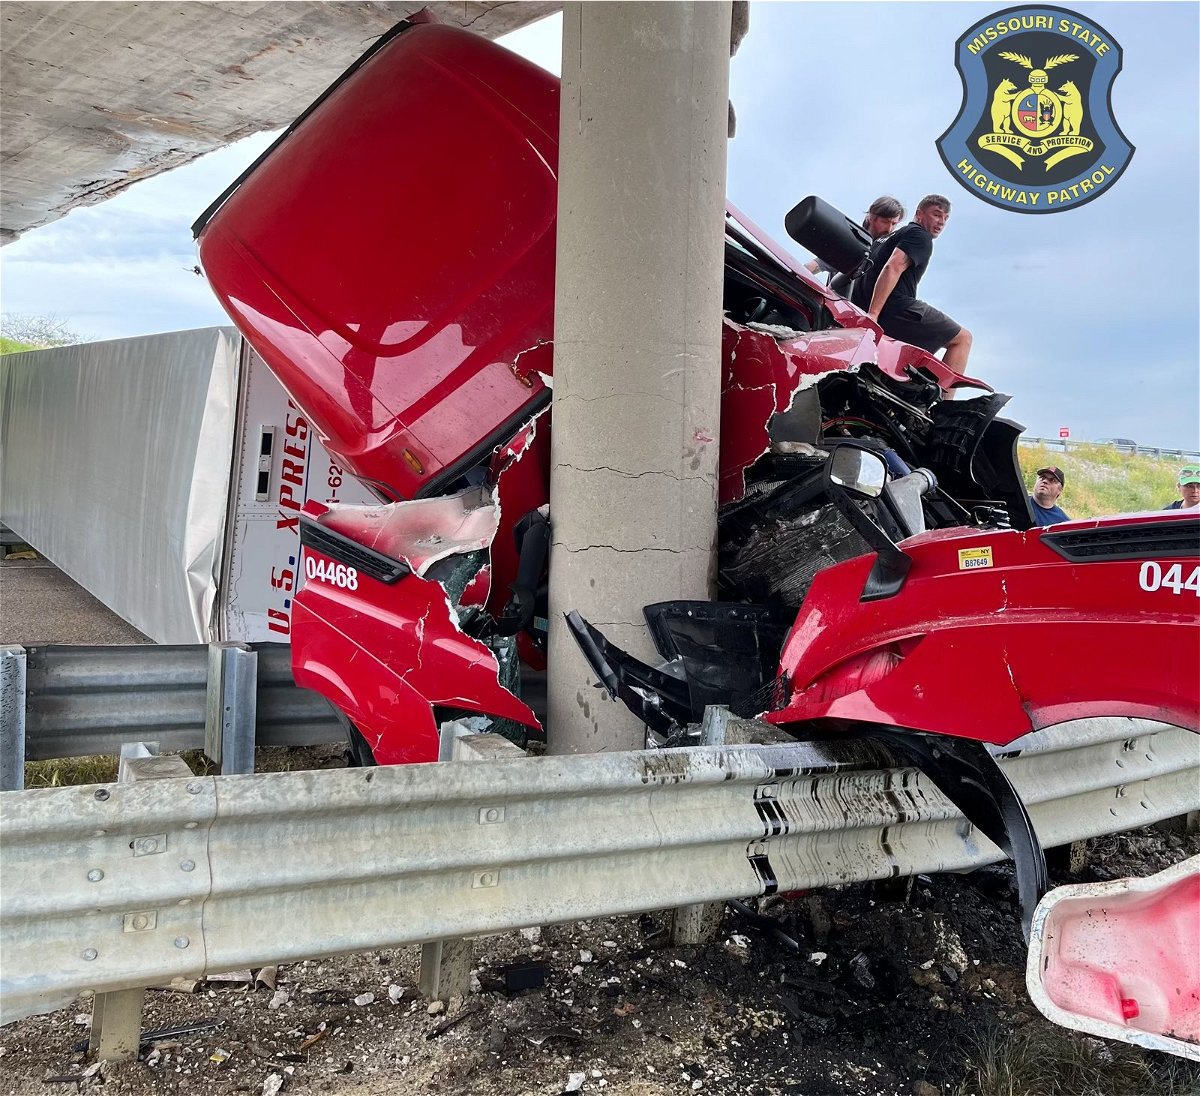 Troopers are investigating an injury crash involving an overturned tractor trailer on westbound I-70 at the 180 mile marker in Montgomery County.